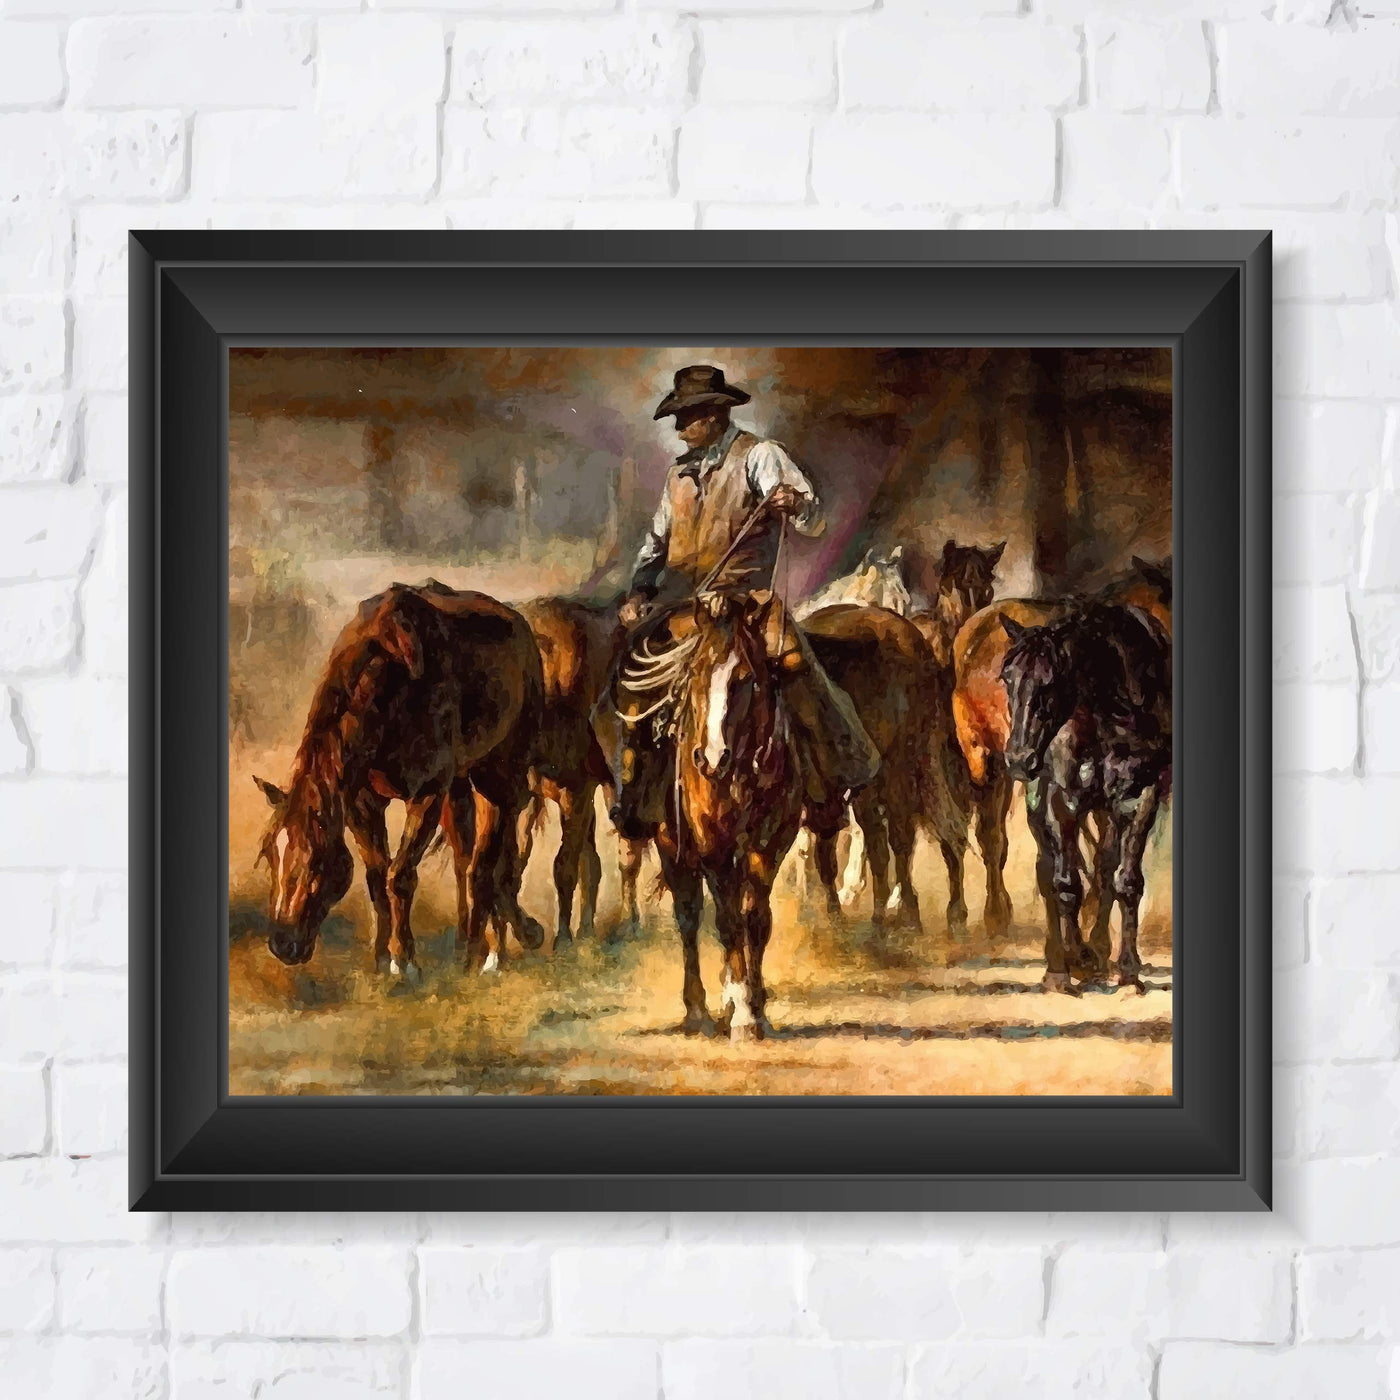 Cowboy Riding Horses- Western Wall Art Sign- 10 x 8"- Country Rustic Replica Art Print-Ready to Frame. Home-Lodge-Camp-Cabin Decor. Great Gift for Cowboys & Horse Lovers!